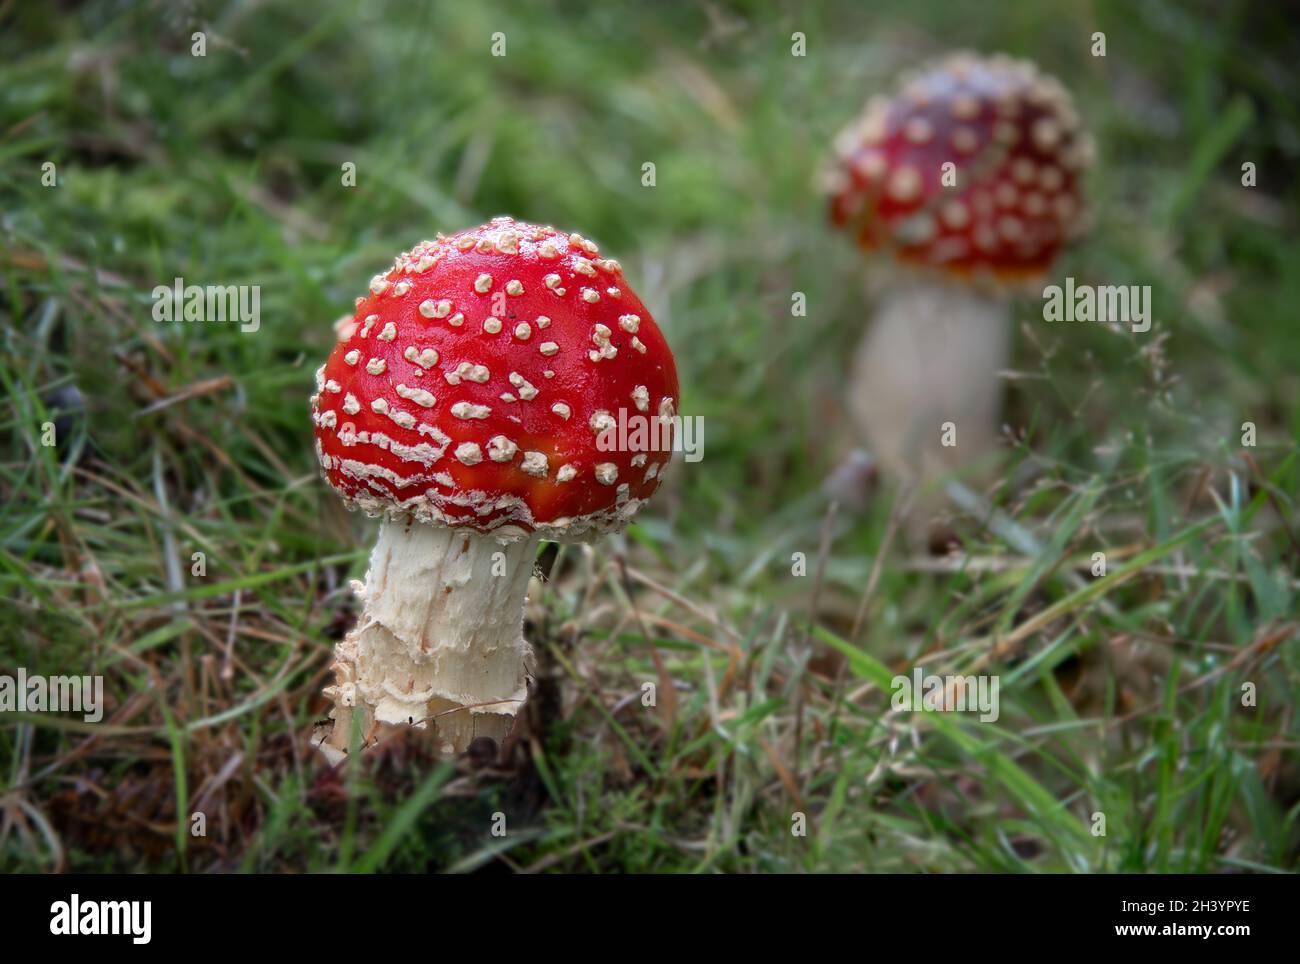 A close up of a fly agaric, Amanita muscaria, mushroom. It has a distinctive red cap with white spots and is a poisonous fungi species Stock Photo